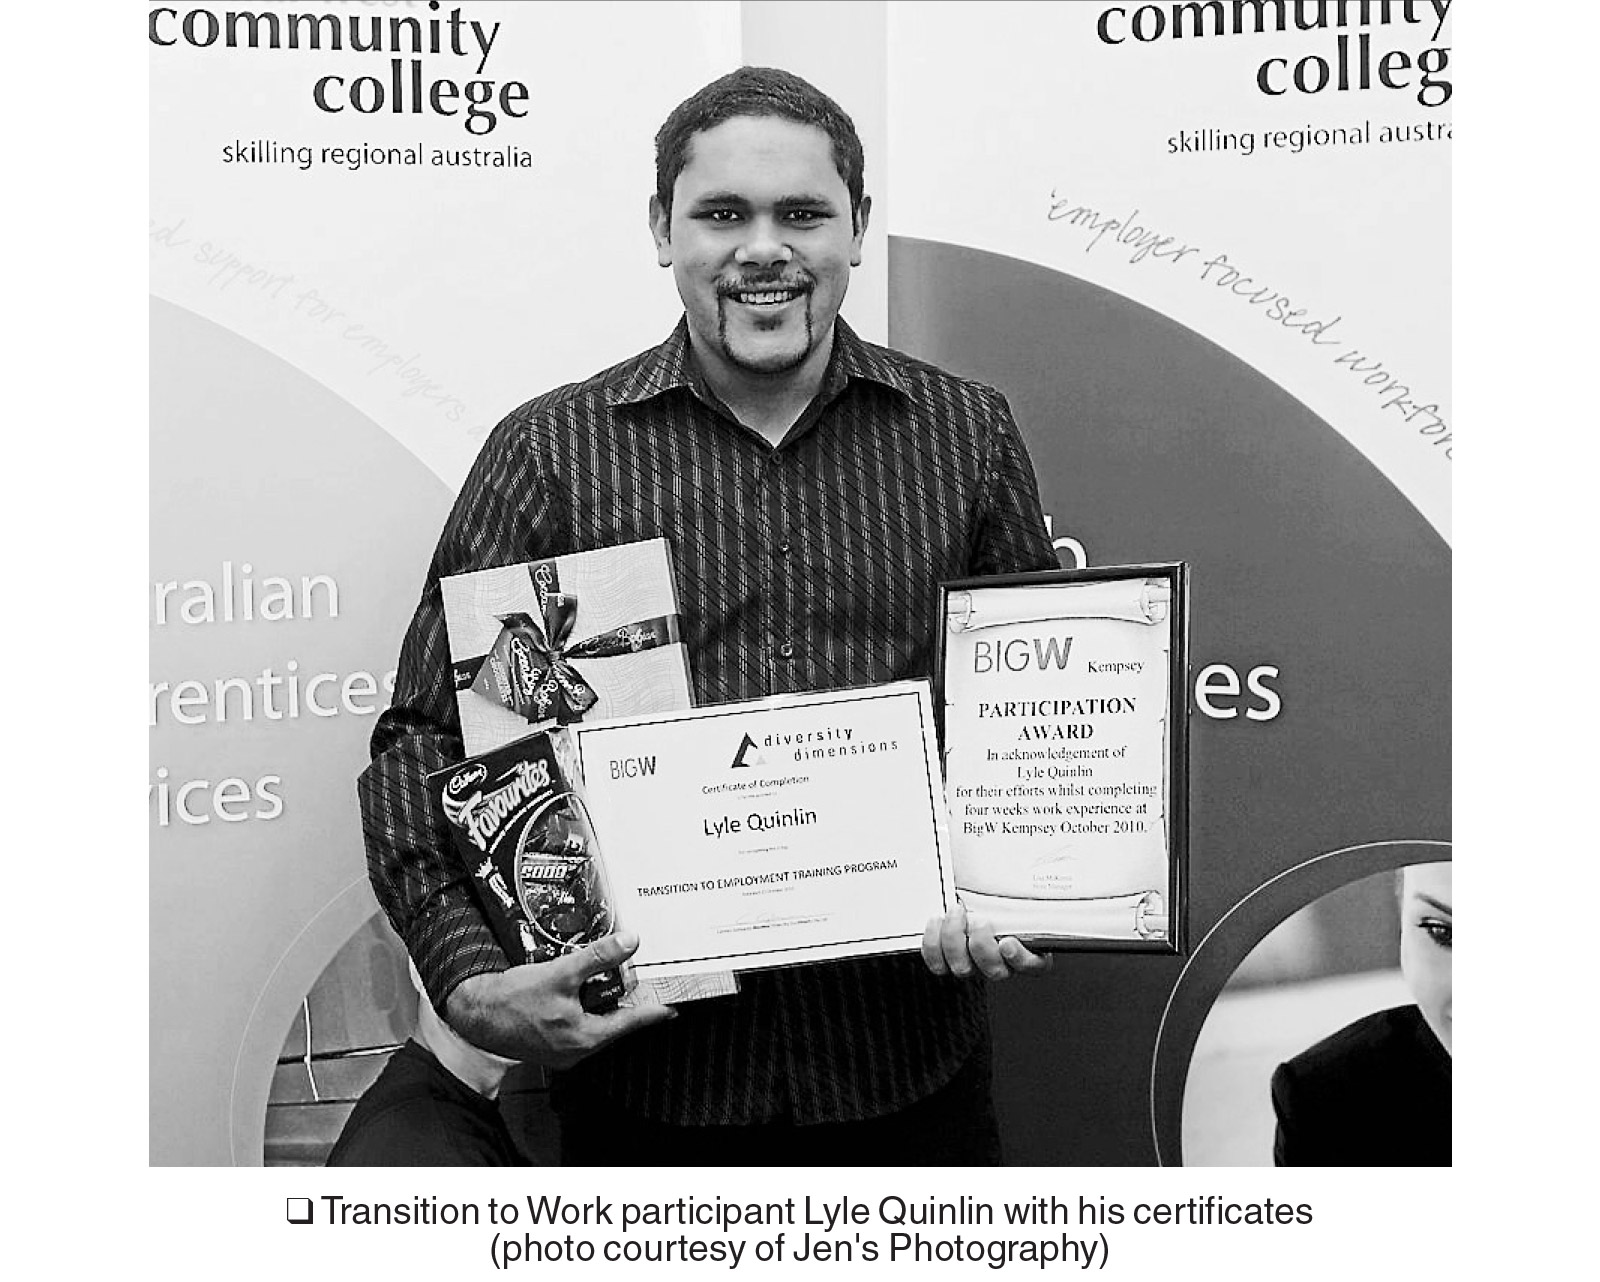 Transition to Work participant Lyle Quinlin with his certificates